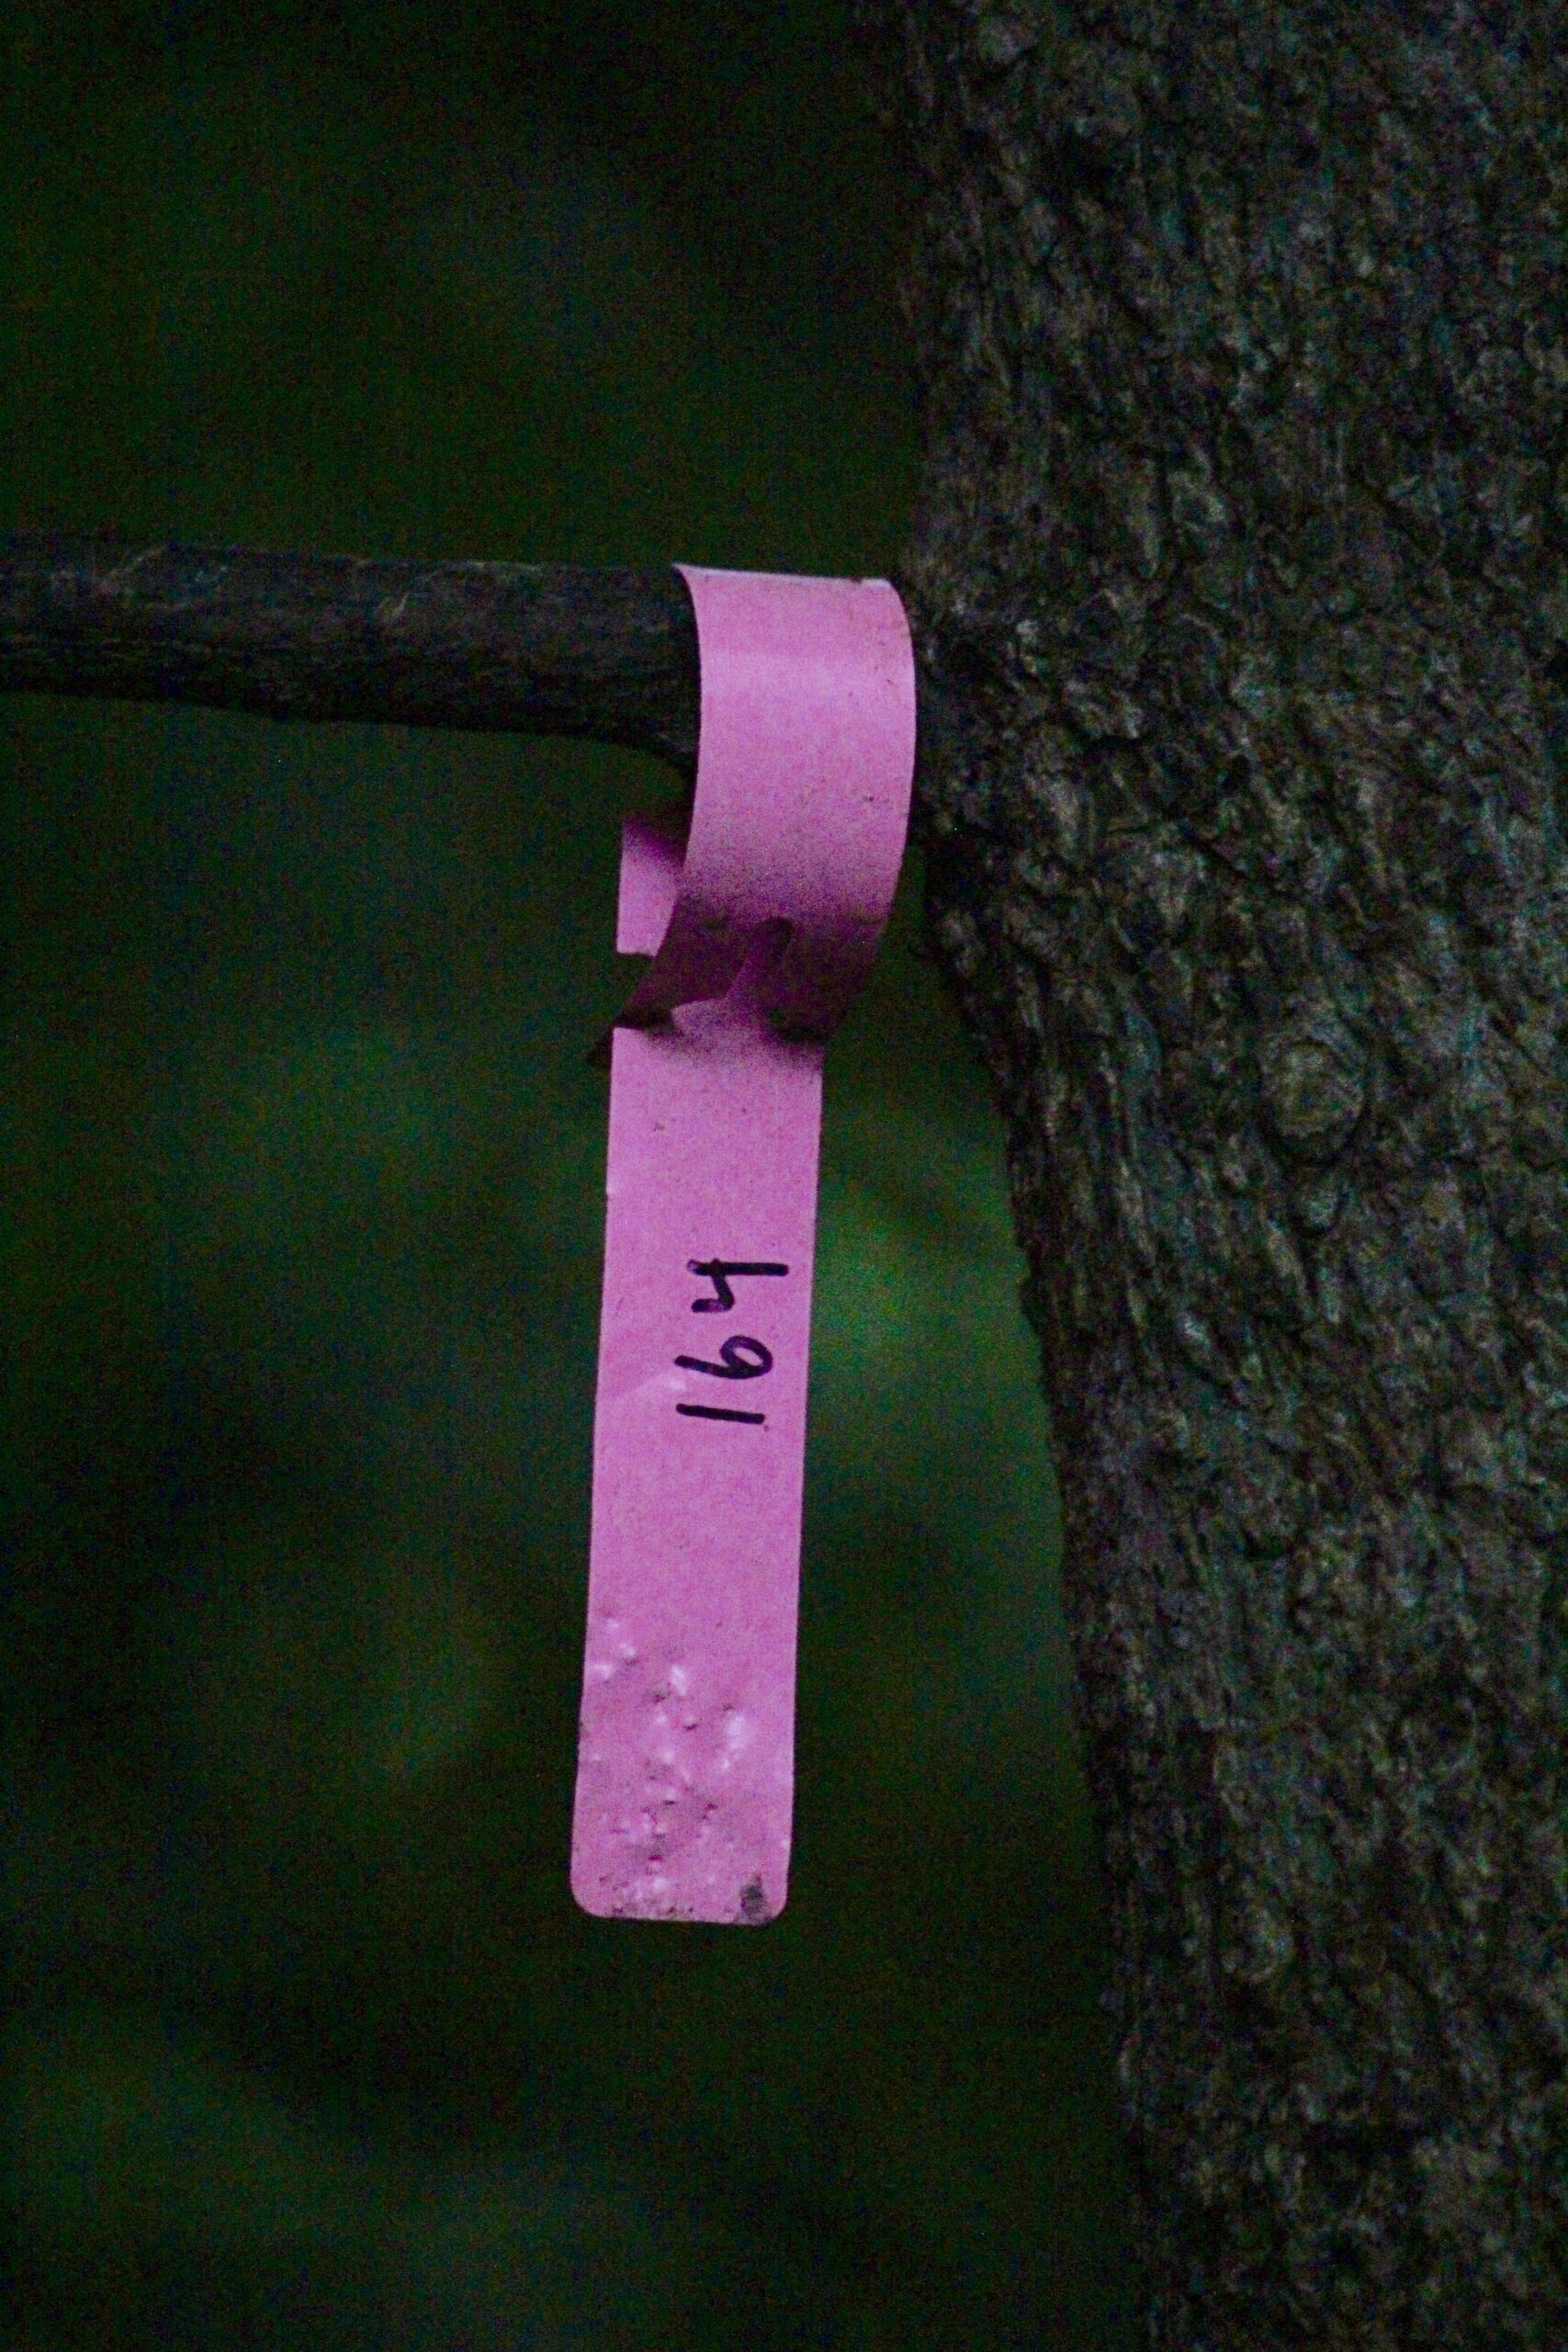 Bright pink tag with 164 written on it in black ink hanging from a thin branch to identify the tree with its number for inventory and tracking purposes.